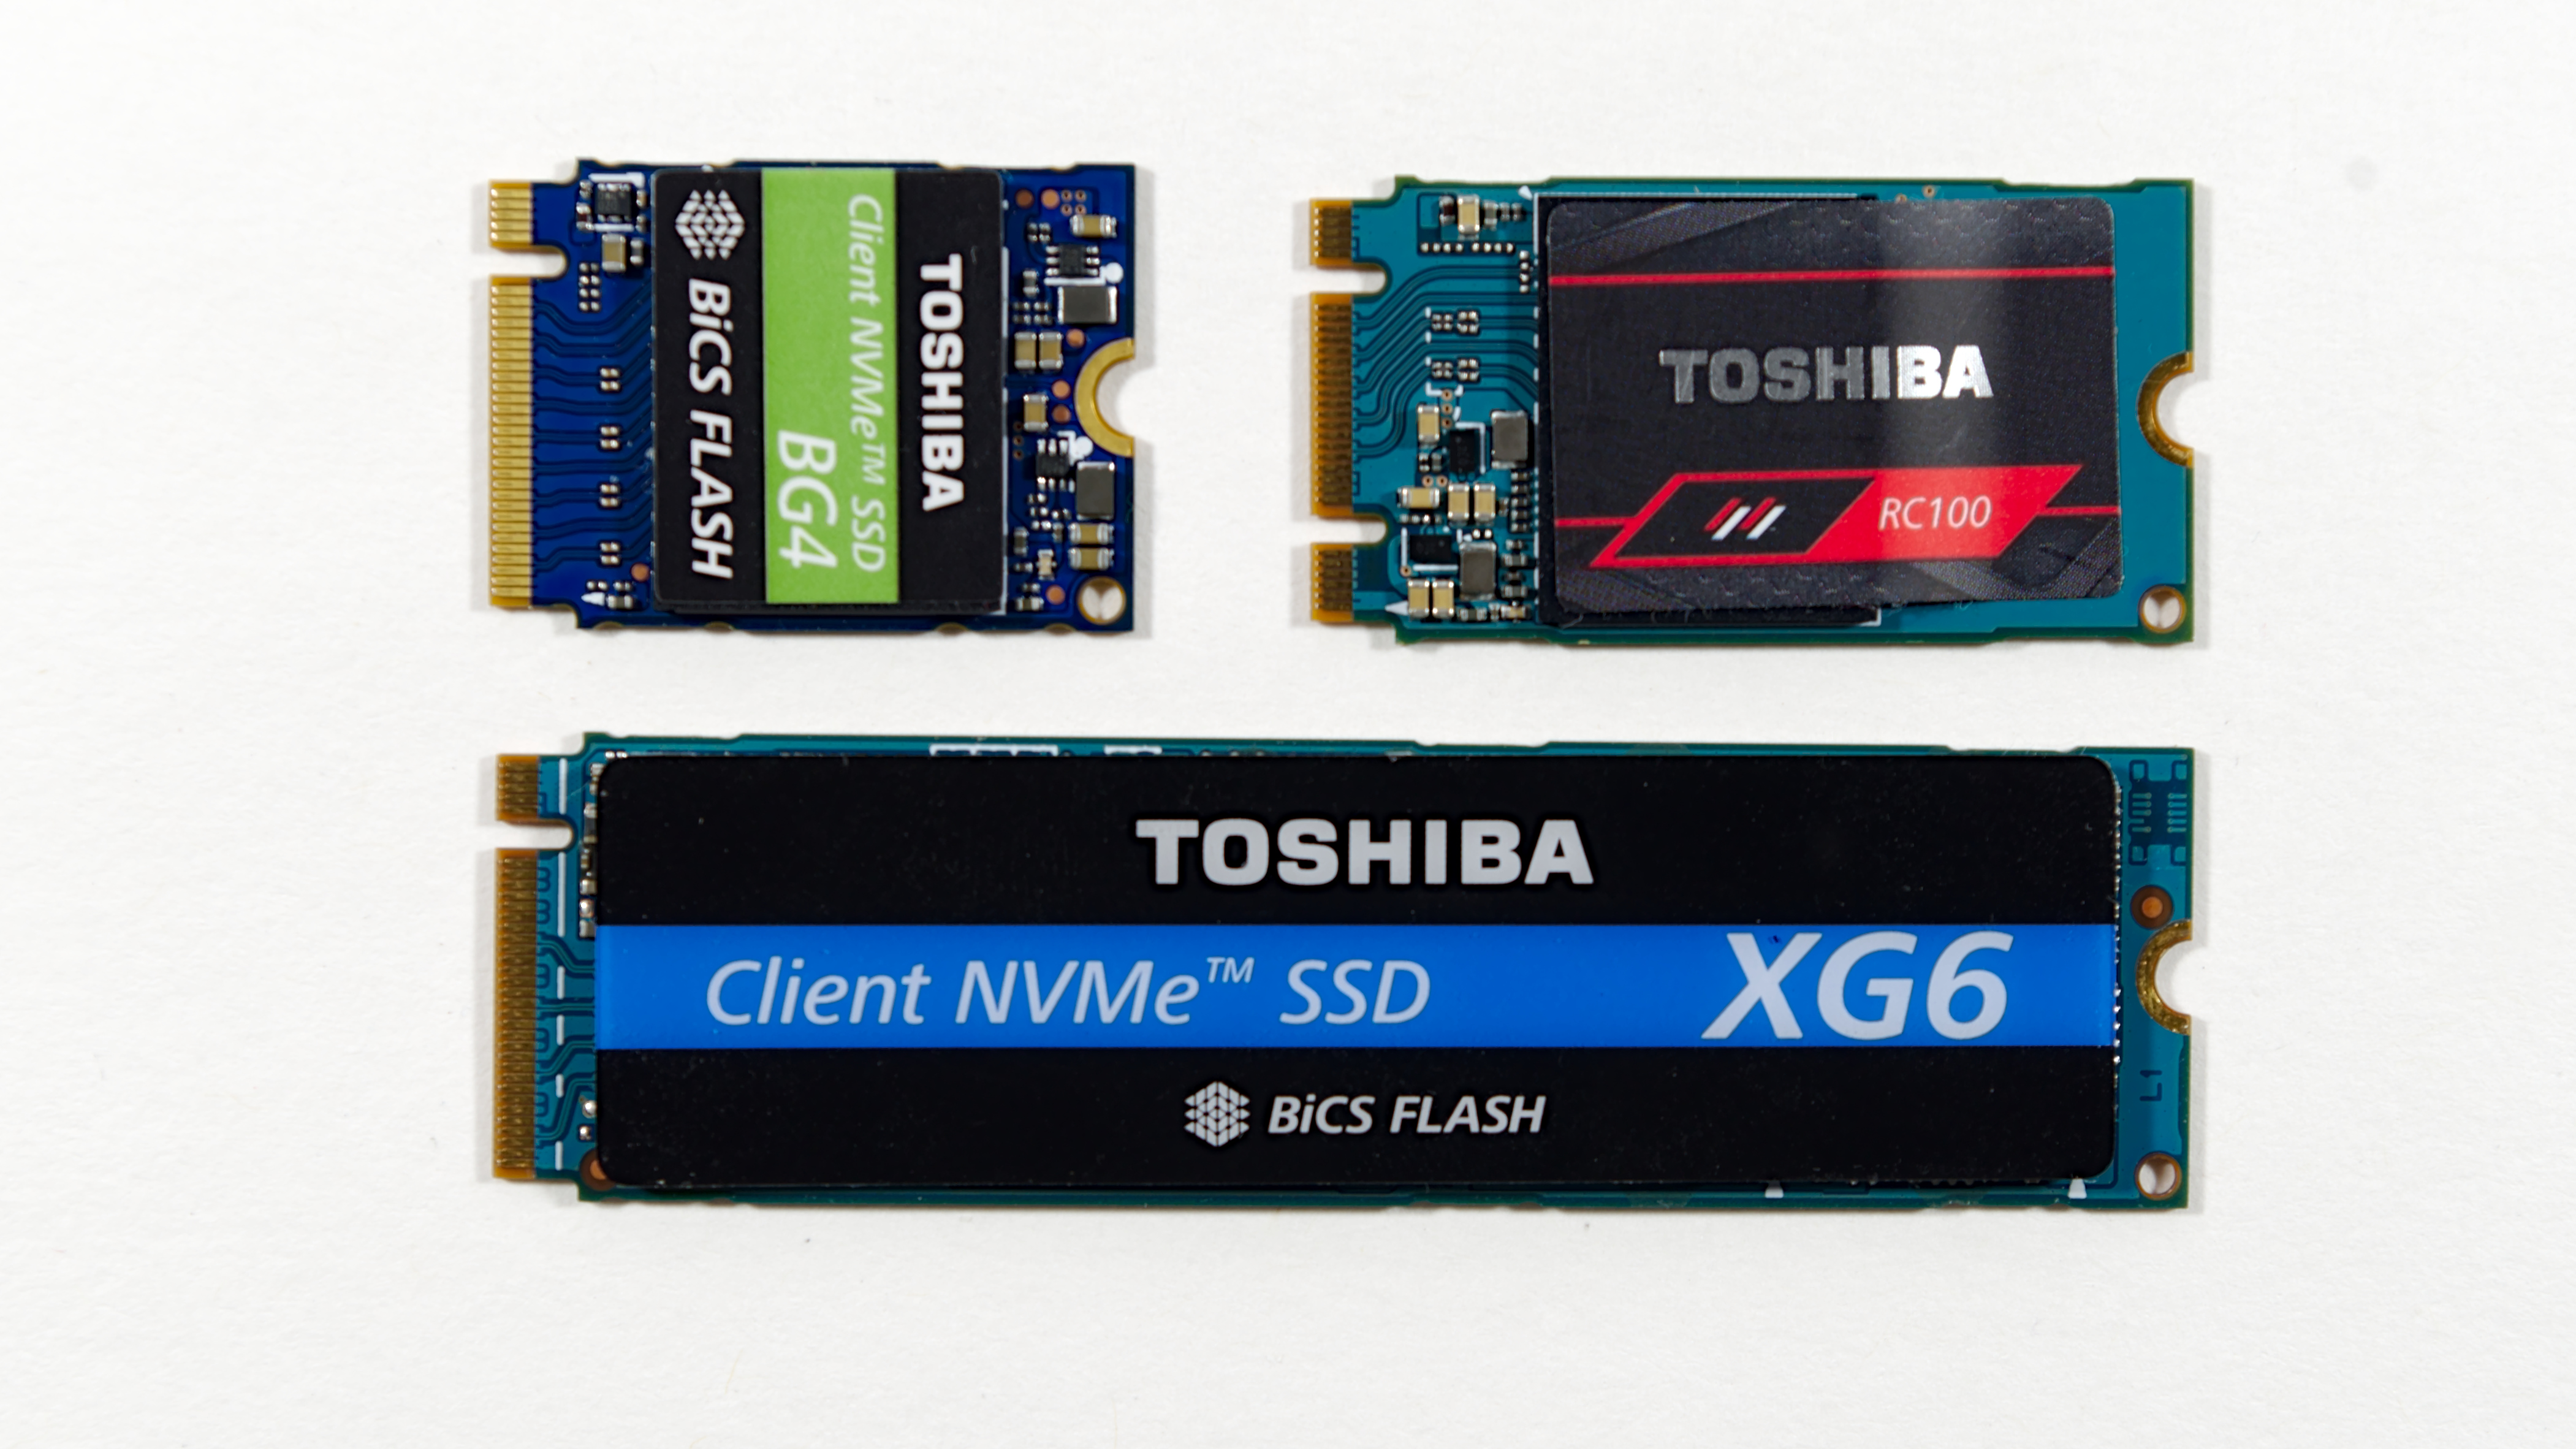 The Toshiba/Kioxia BG4 1TB SSD Review: A Look At Your Next Laptop's SSD